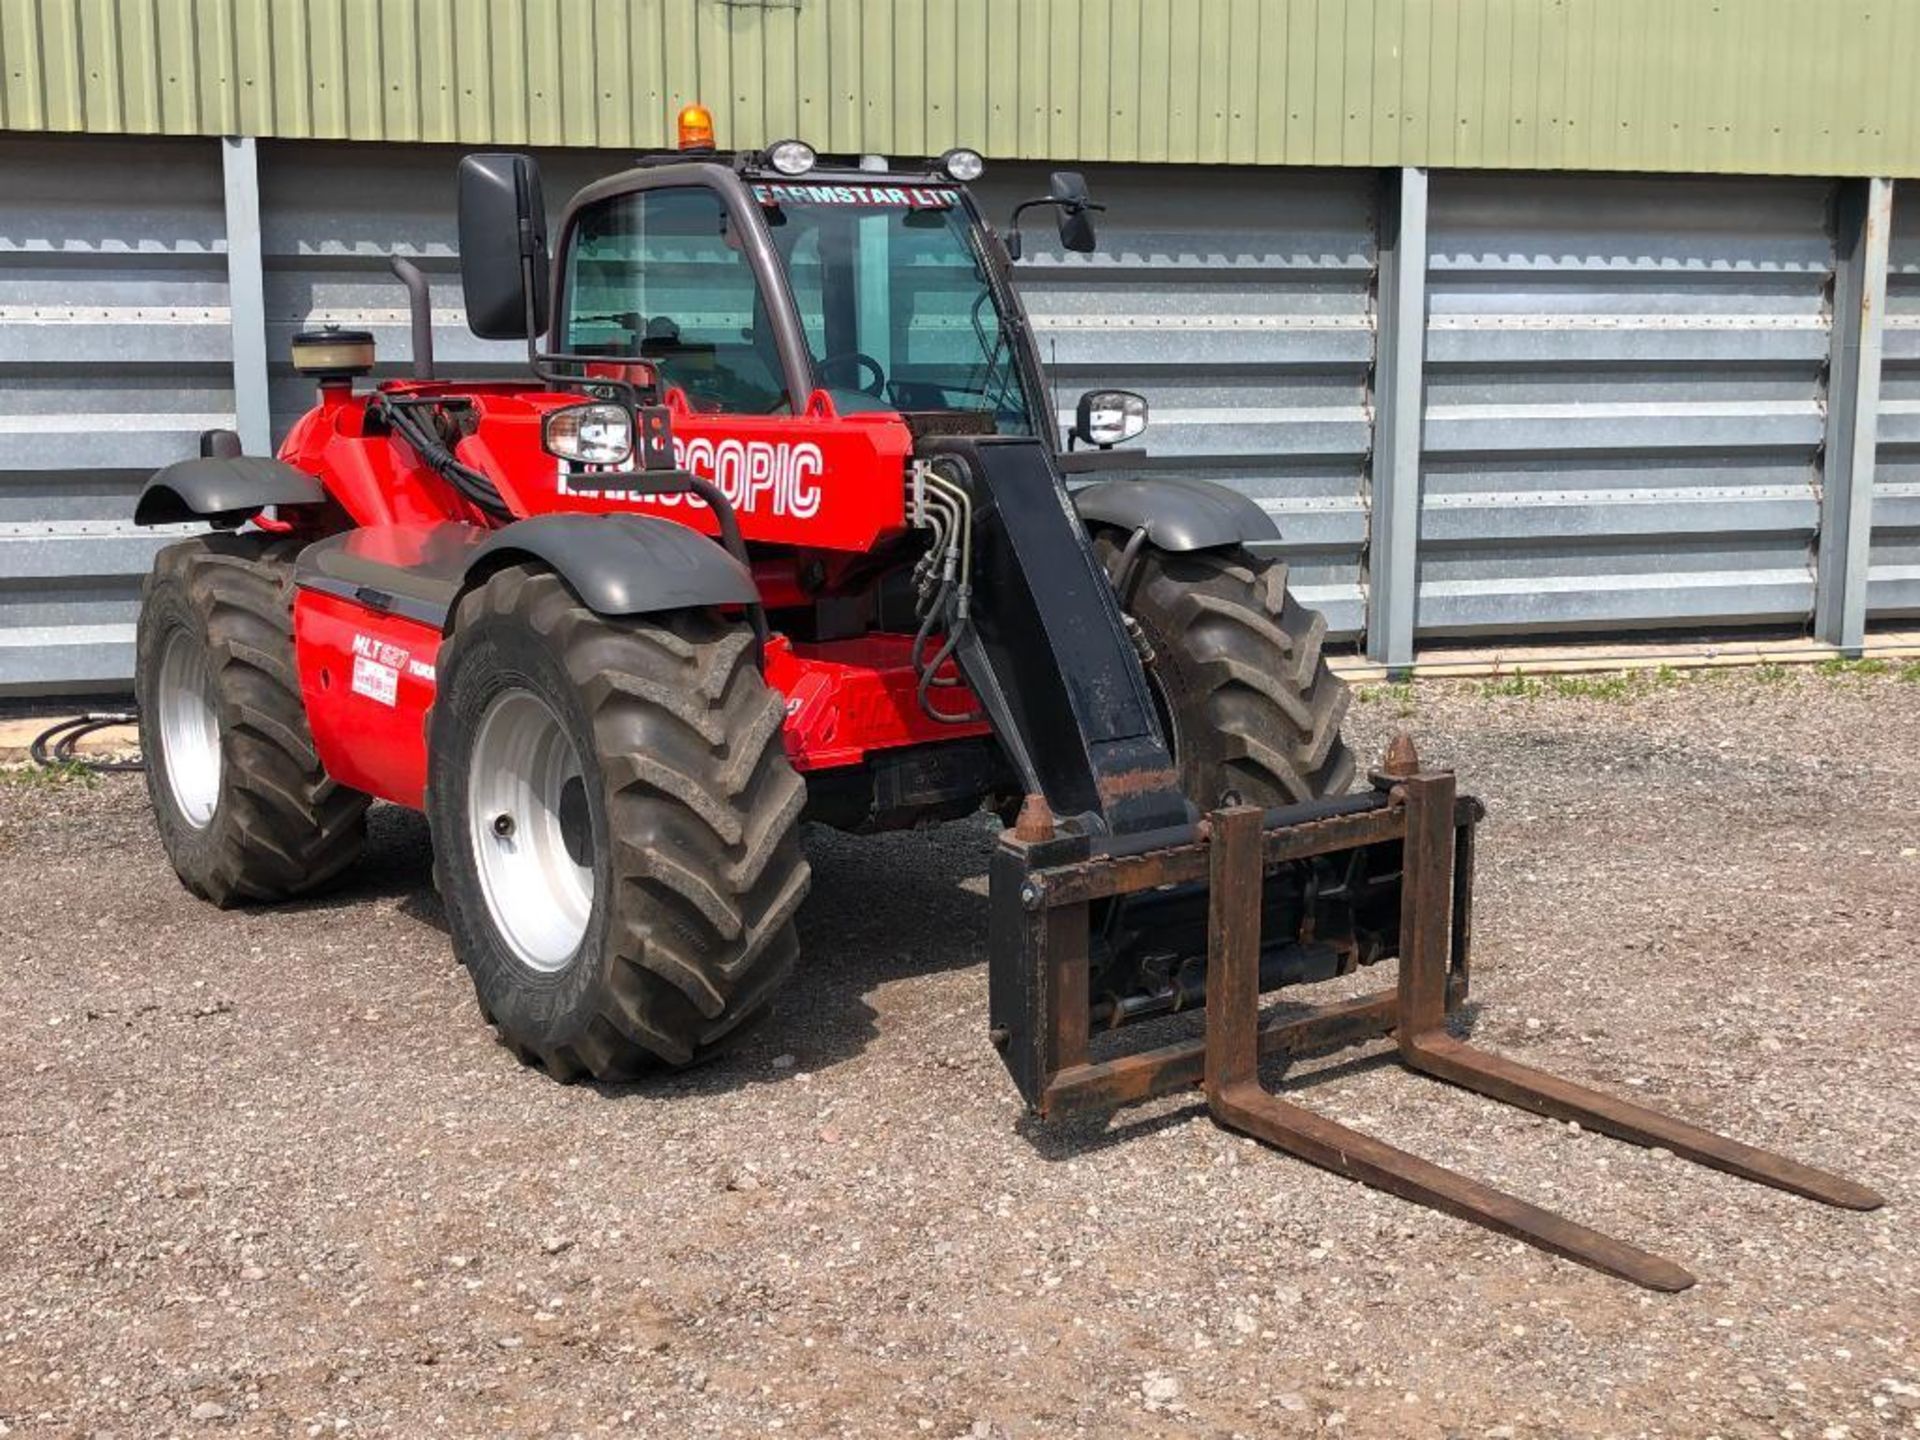 2010 Manitou MLT627 Turbo materials handler c/w air conditioned cab, pick up hitch, pin and cone hea - Image 46 of 47